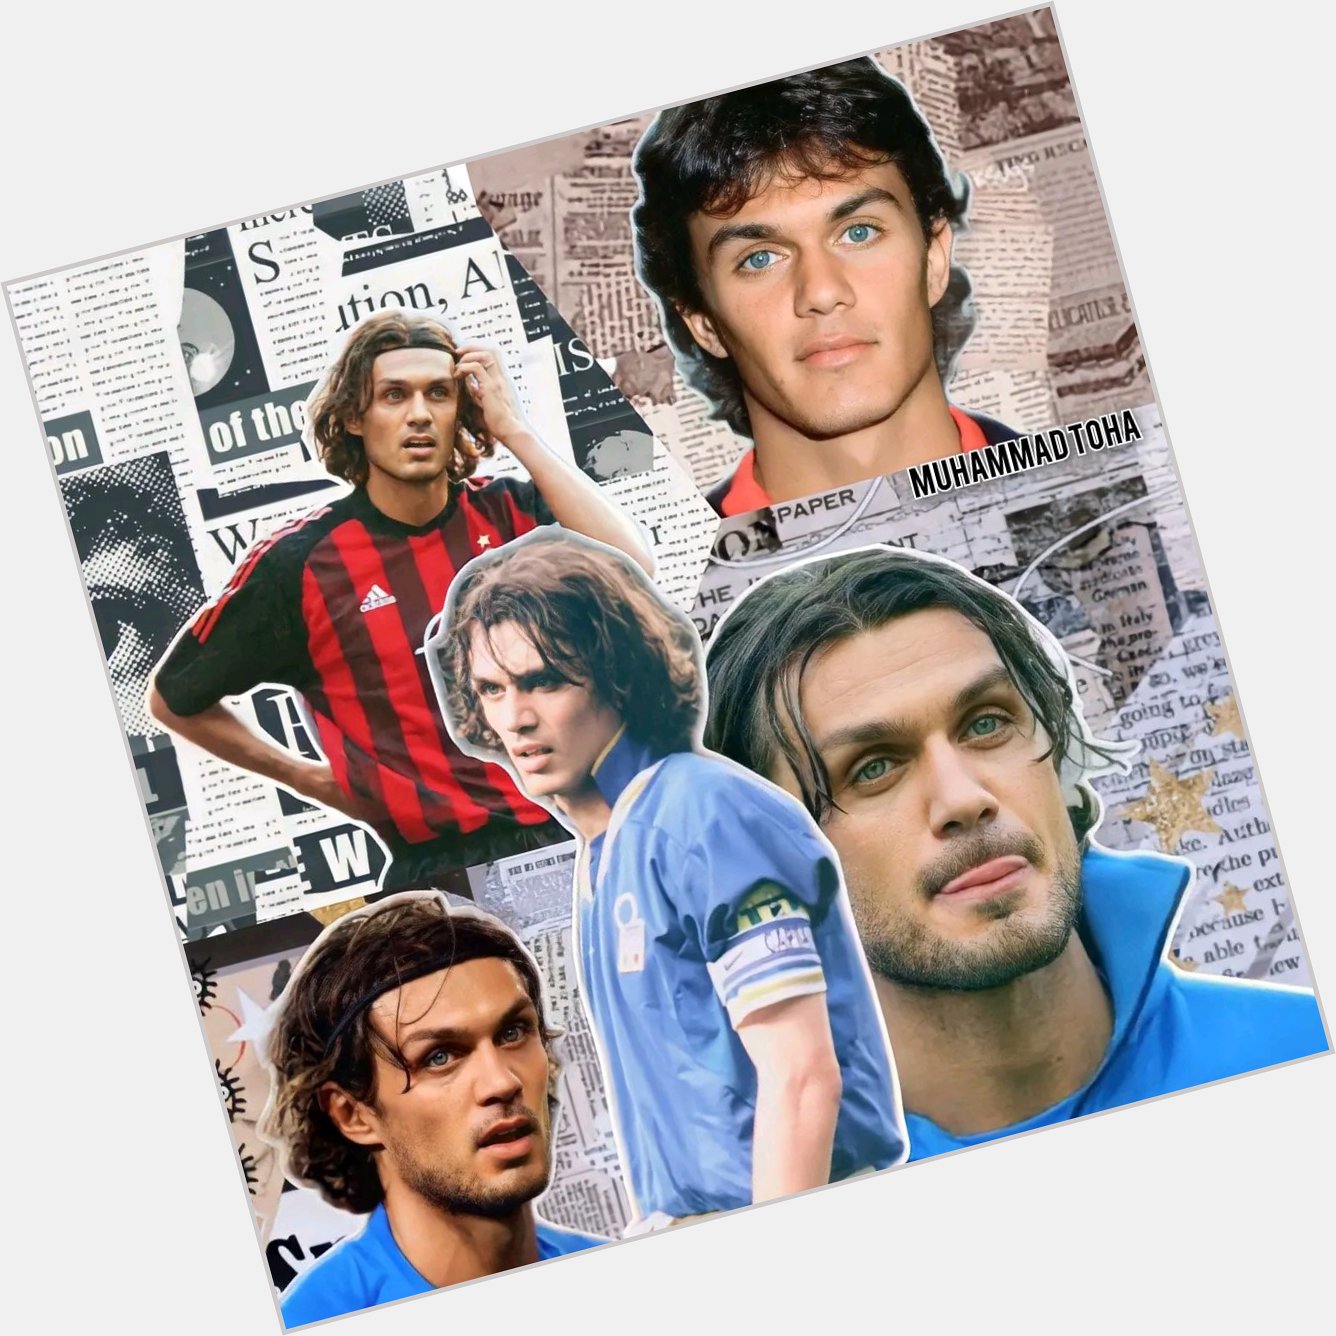 Happy Birthday Paolo Maldini, One Of The Greatest Defenders Of All Time...   My Italian Idolo    